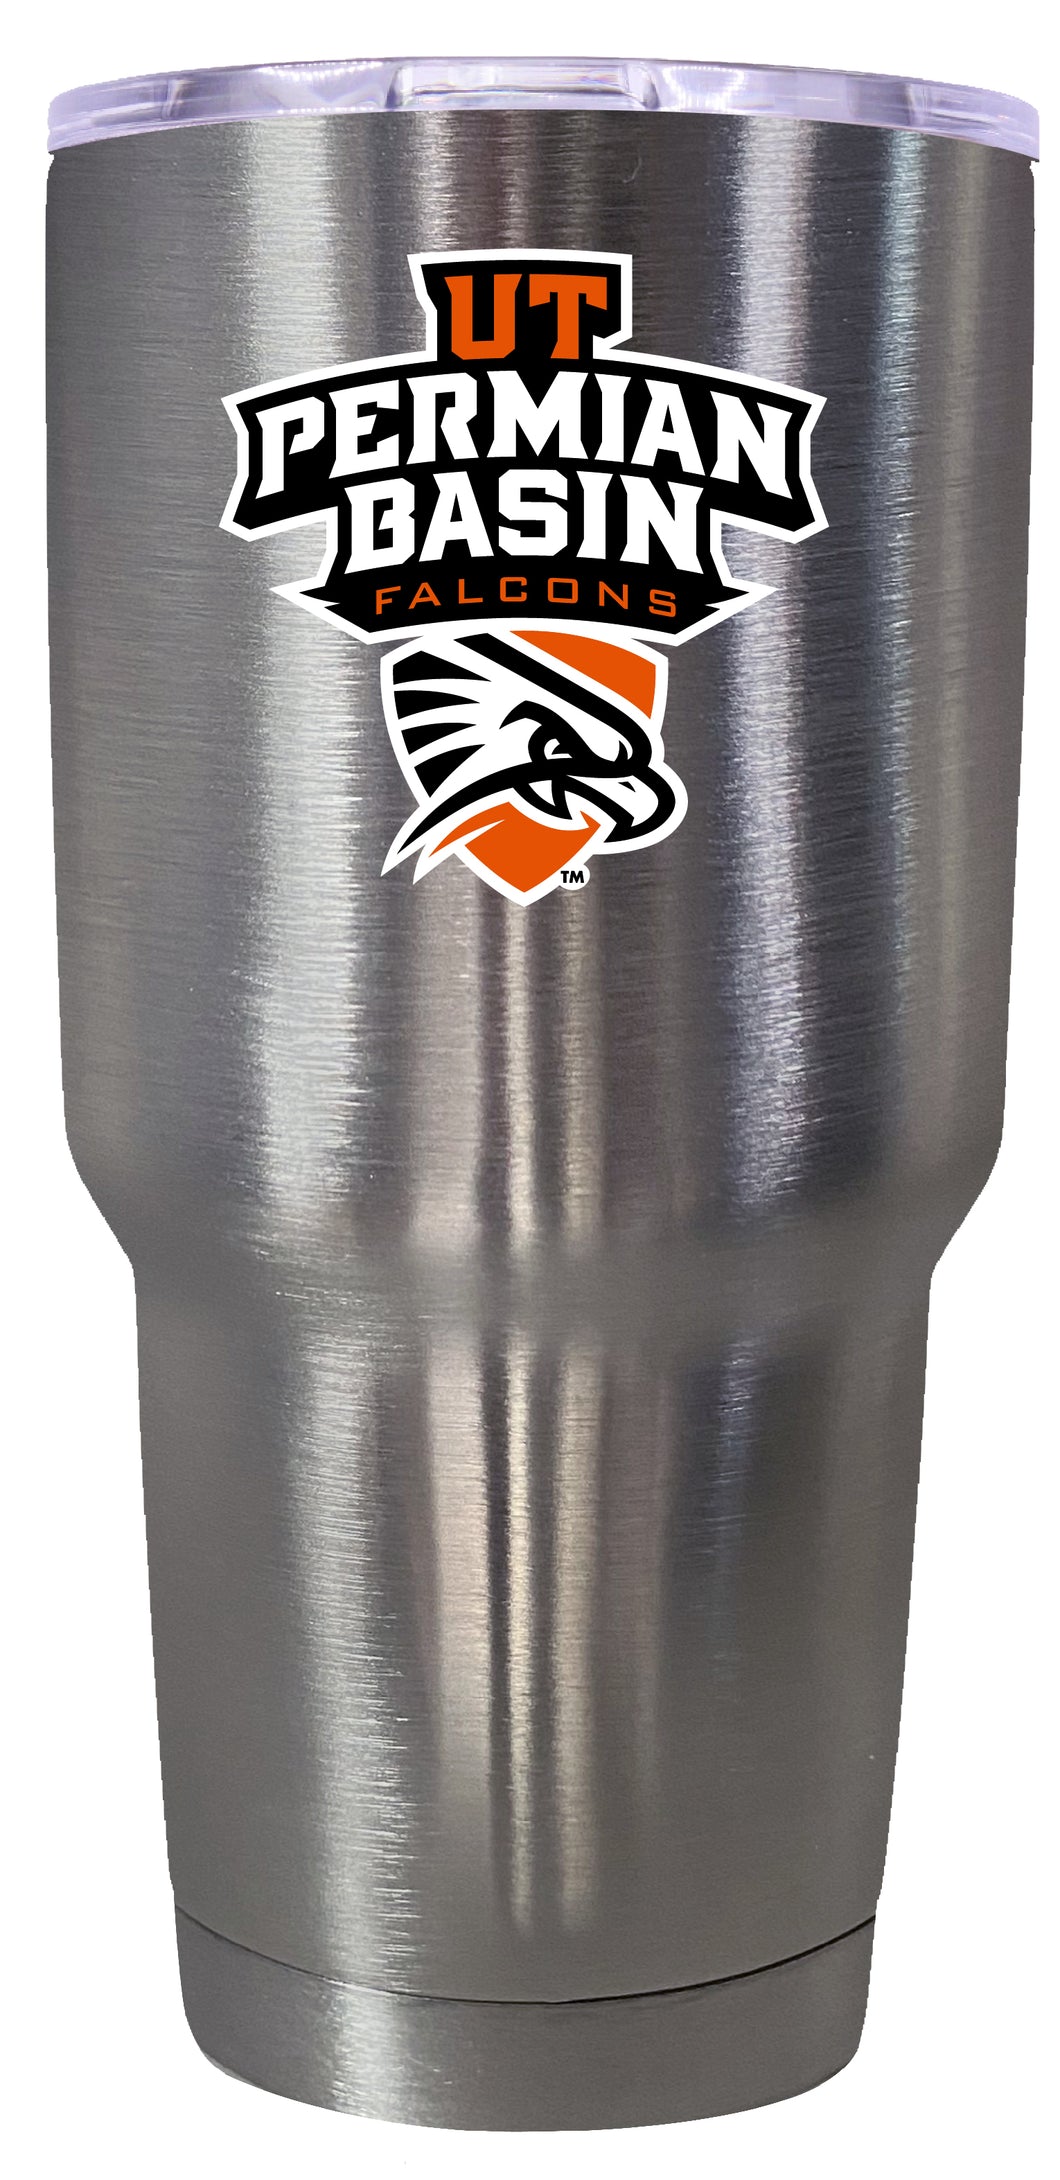 University of Texas of the Permian Basin Mascot Logo Tumbler - 24oz Color-Choice Insulated Stainless Steel Mug